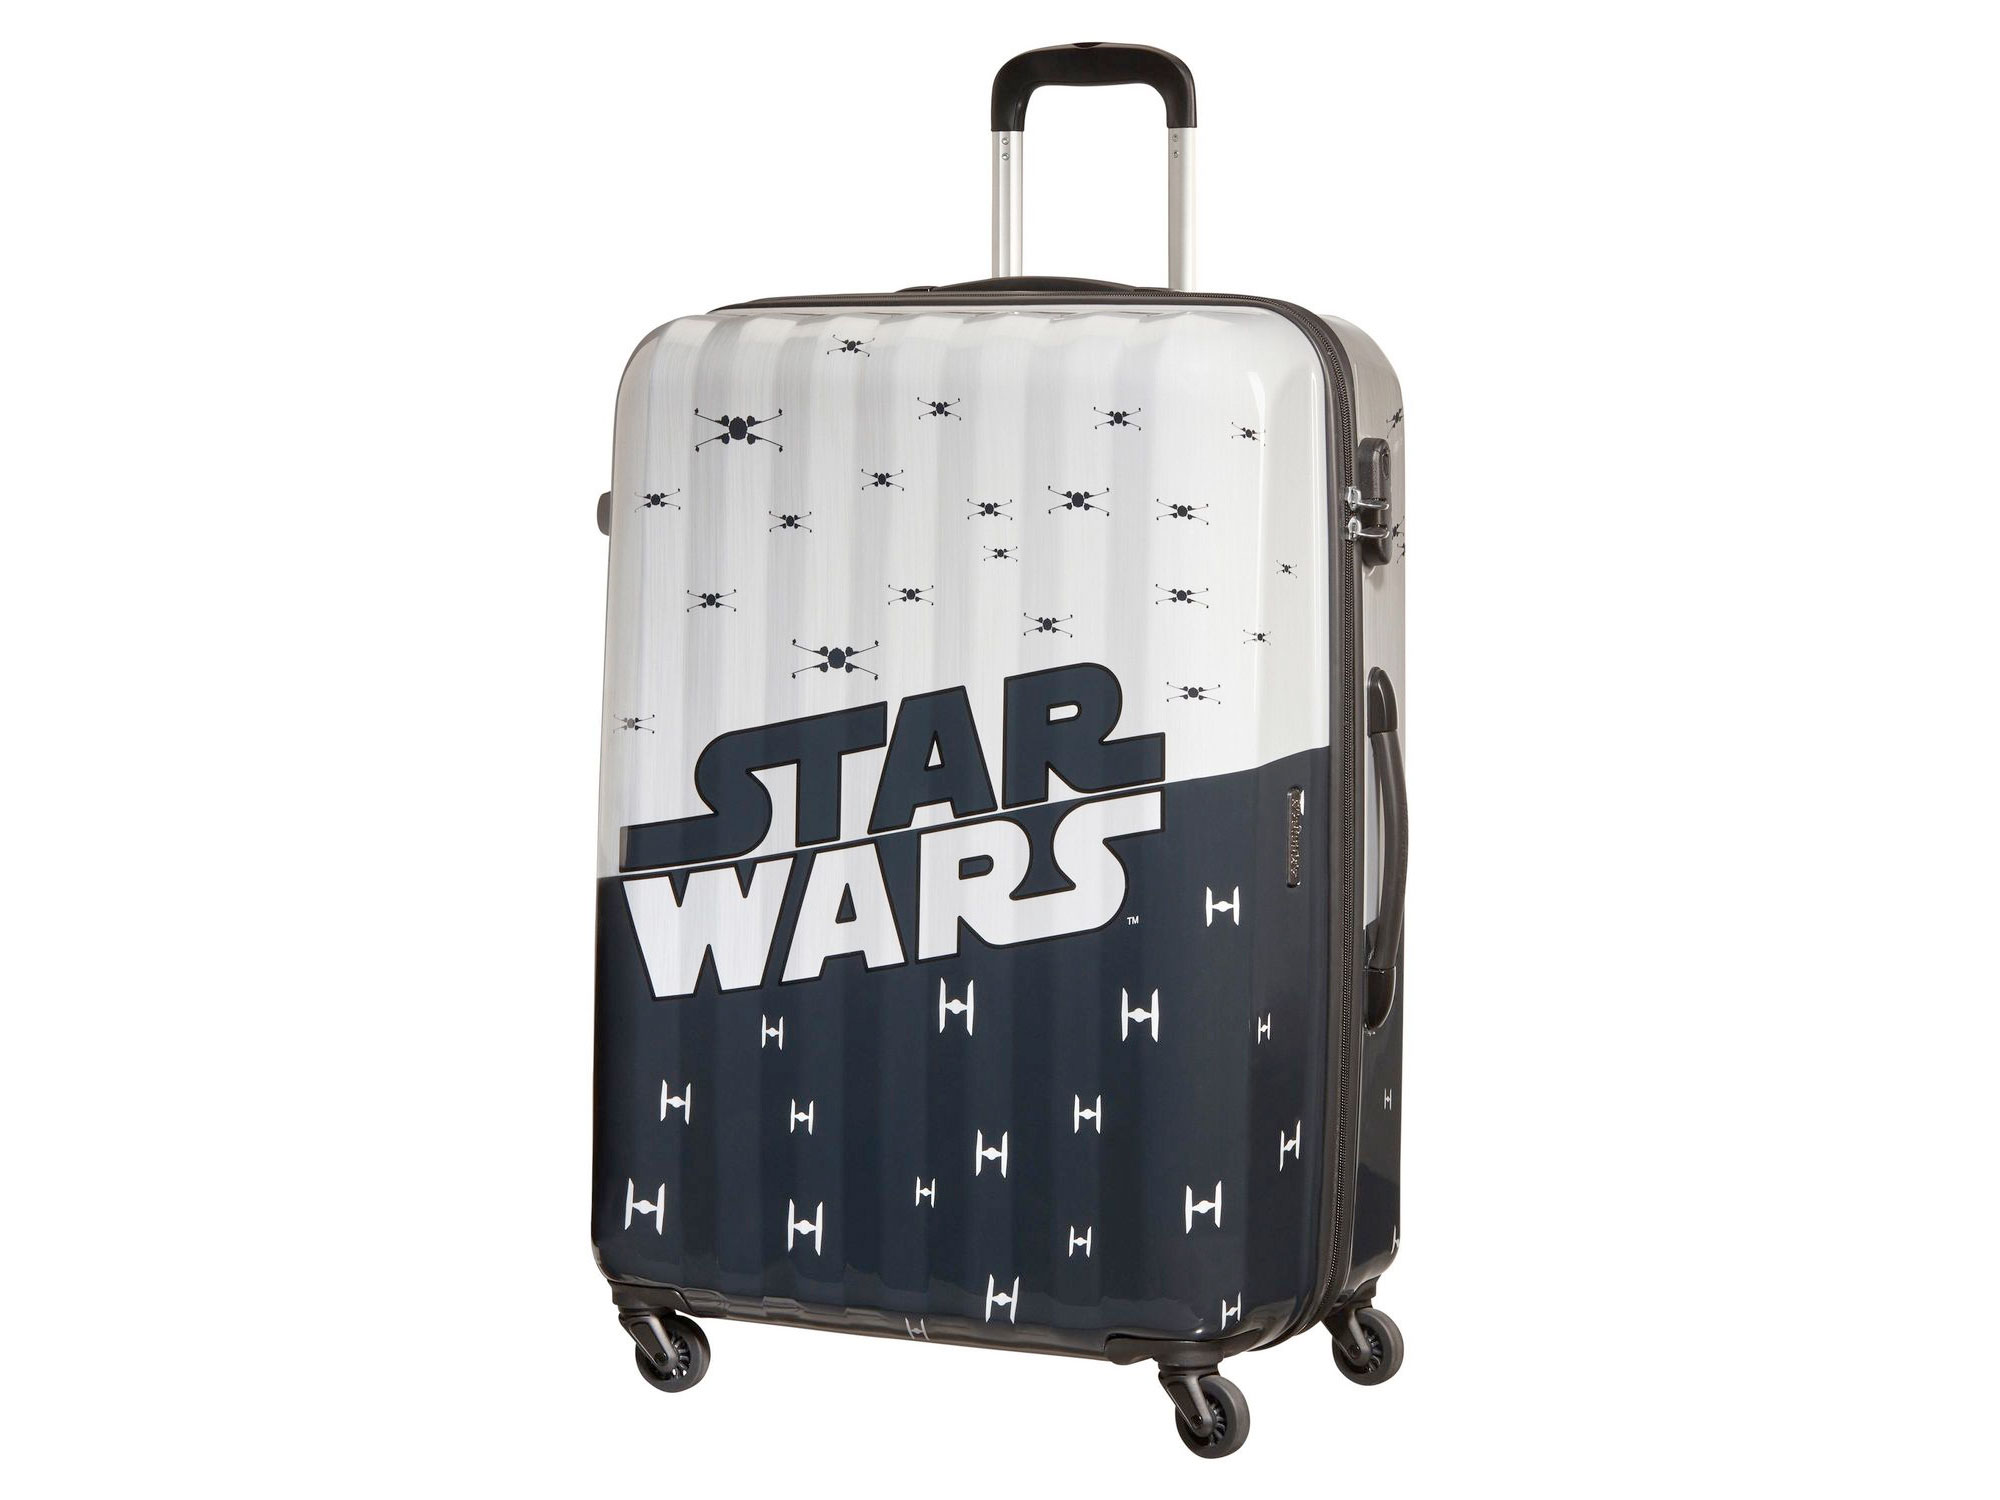 Walmart.ca：American Tourister x Star Wars 360度四轮行李箱(Large Size)只卖$89.97